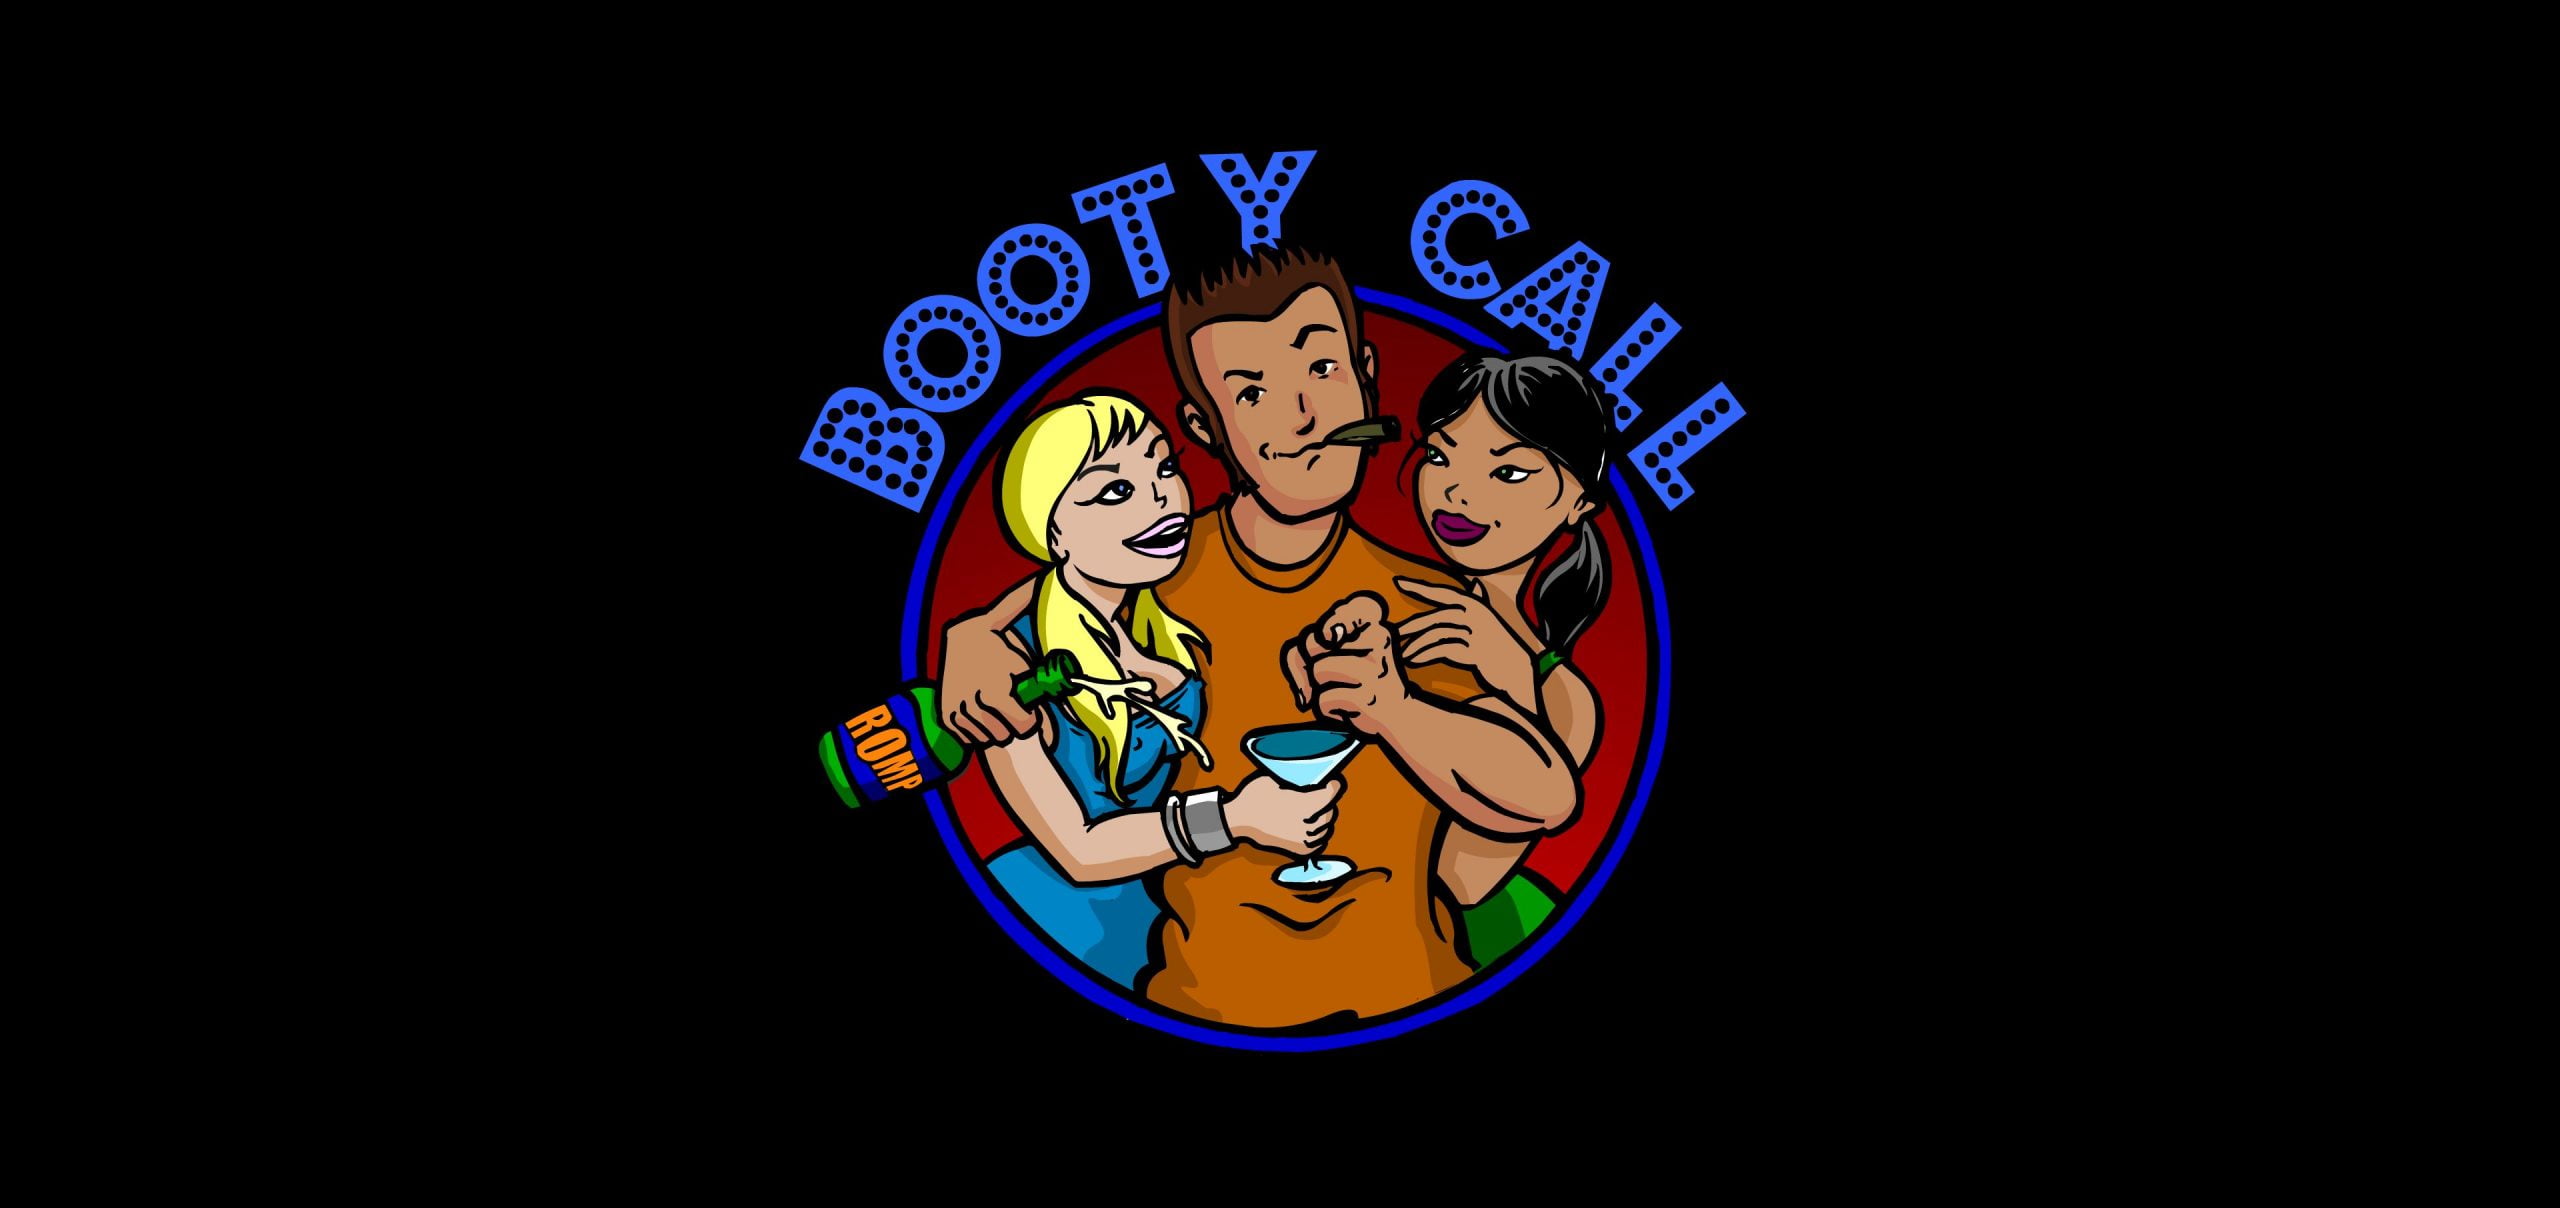 Bootycall games